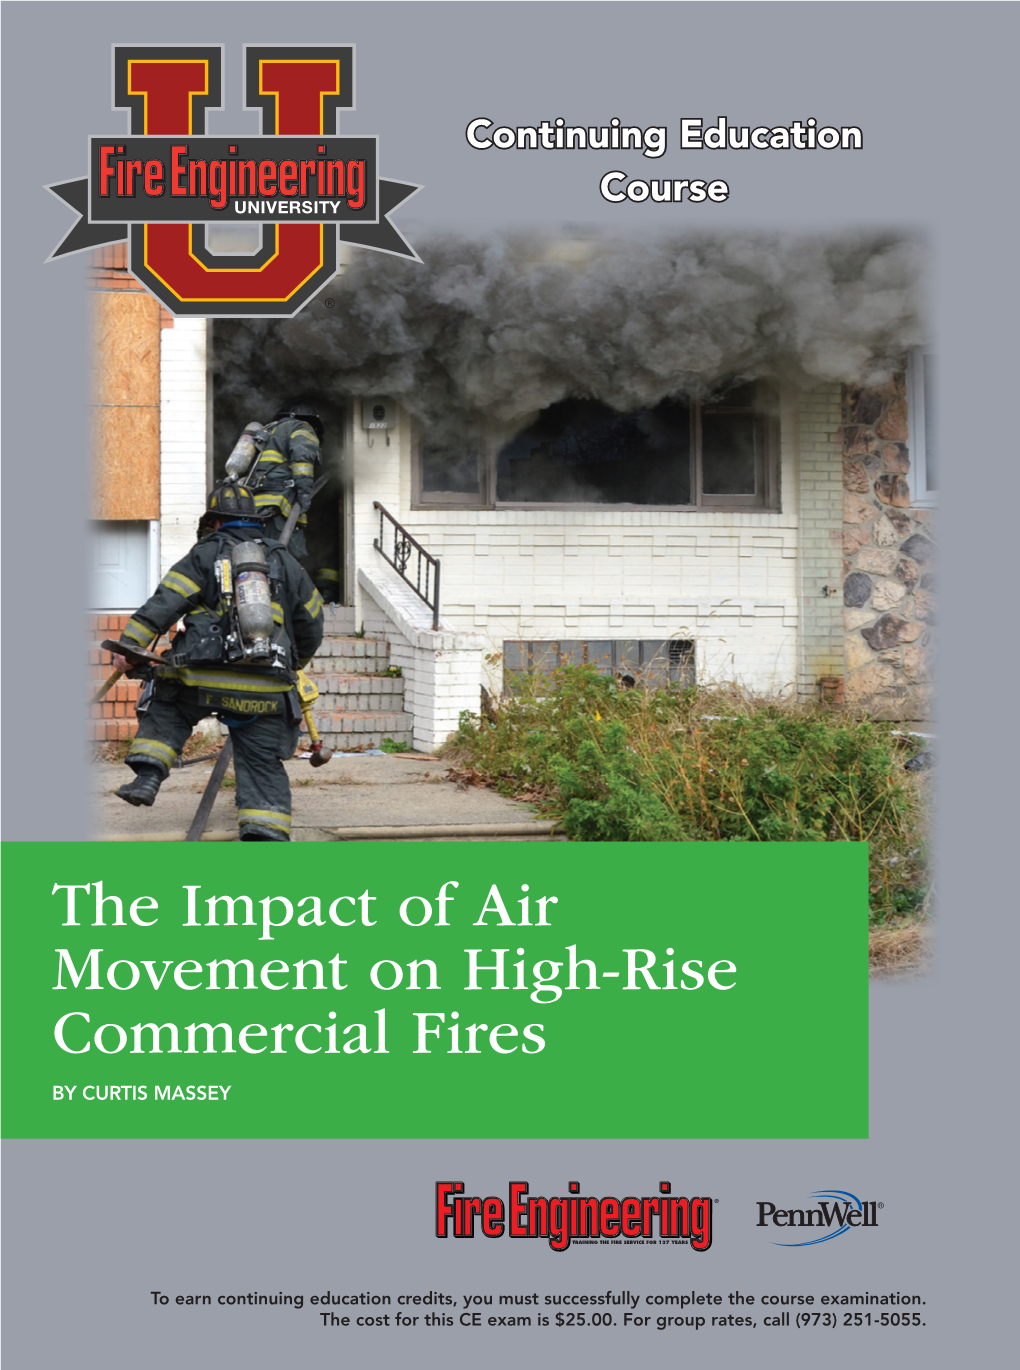 The Impact of Air Movement on High-Rise Commercial Fires